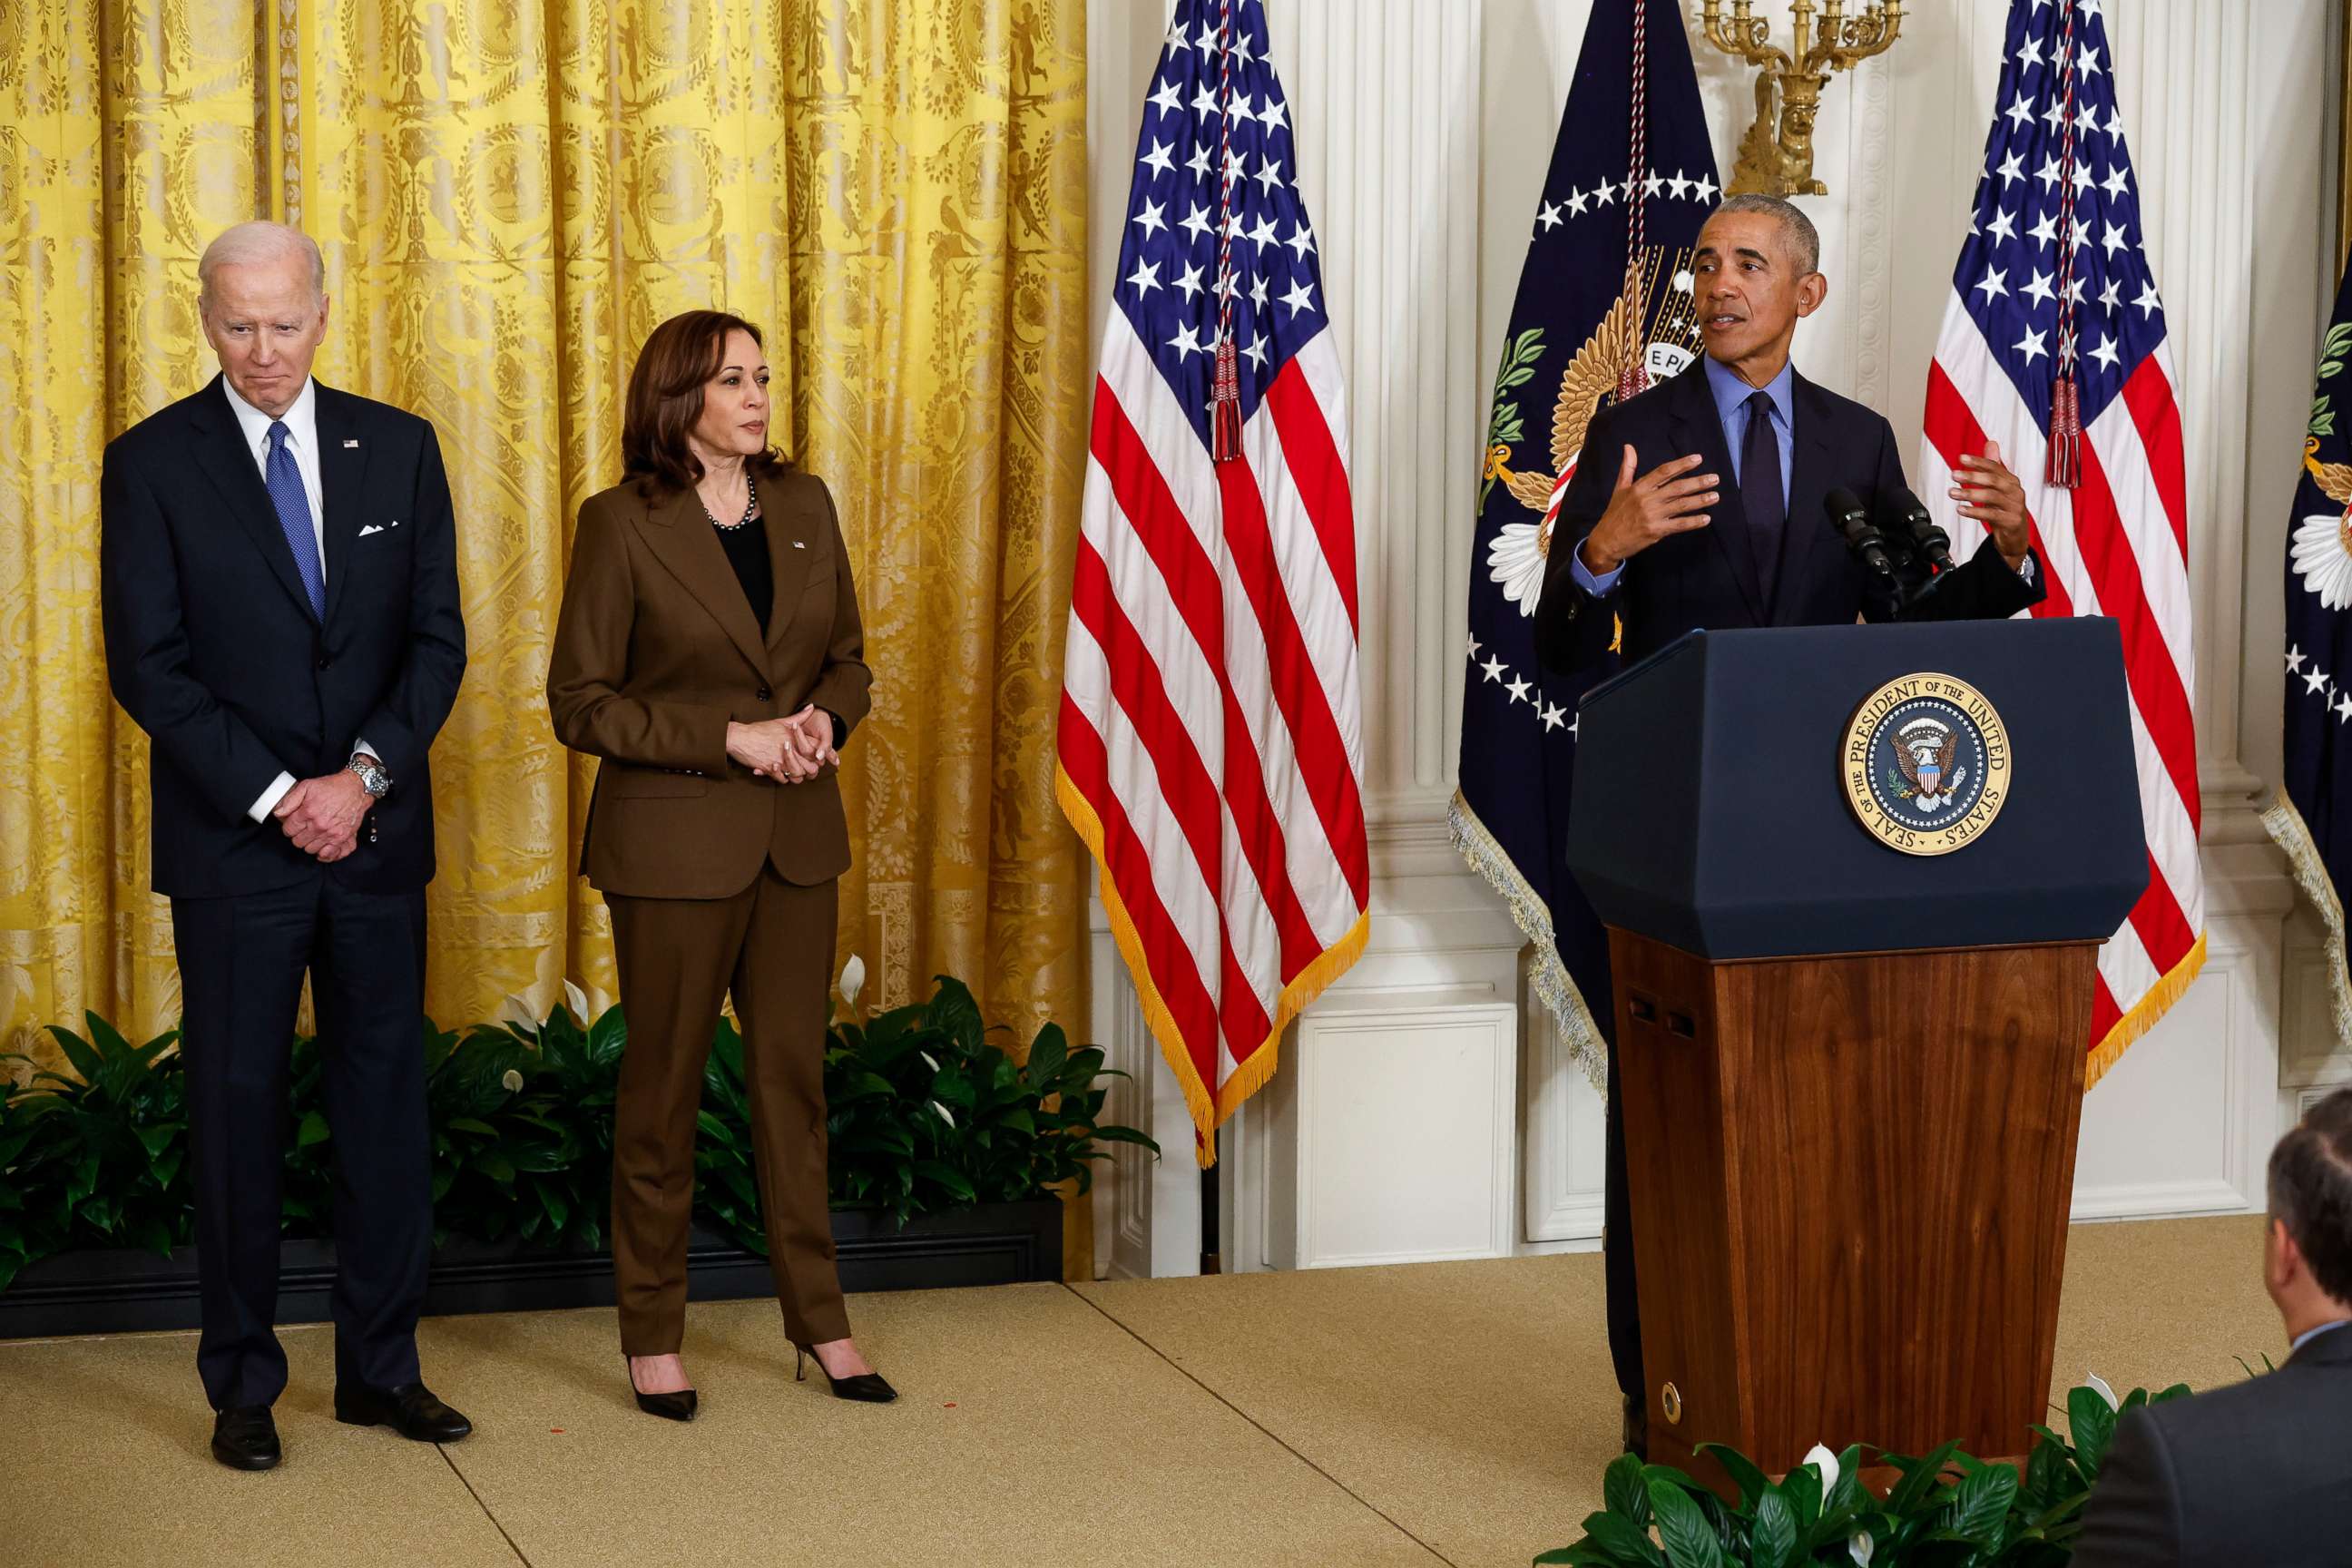 PHOTO: President Joe Biden and Vice President Kamala Harris look on as former President Barack Obama speaks during an event to mark the 2010 passage of the Affordable Care Act in the East Room of the White House, April 5, 2022 in Washington, DC.